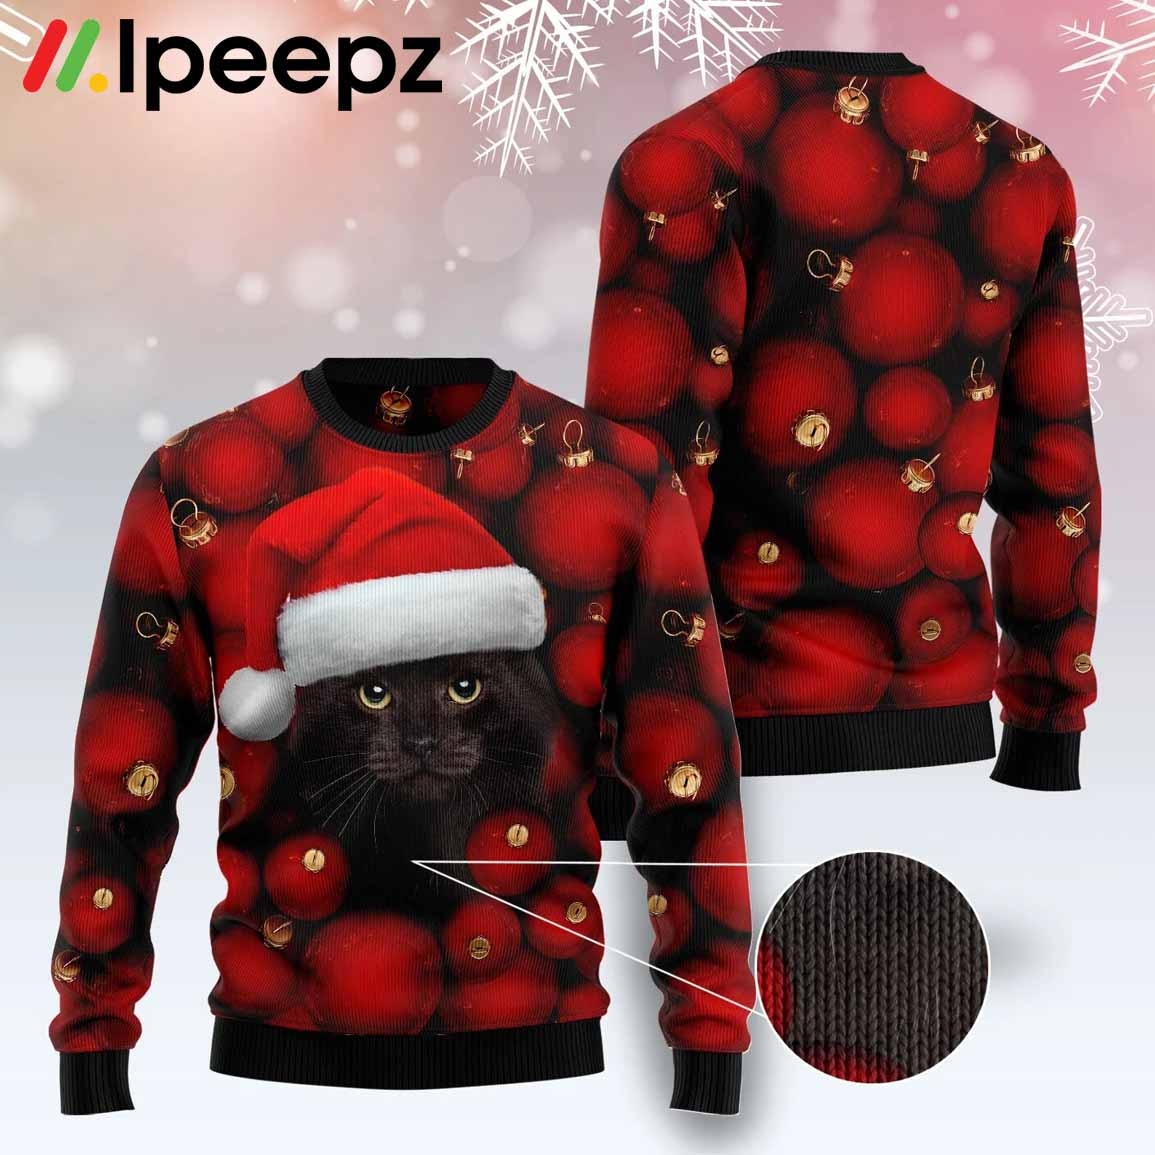 Cute Black Cat Funny Family Ugly Christmas Holiday Sweater